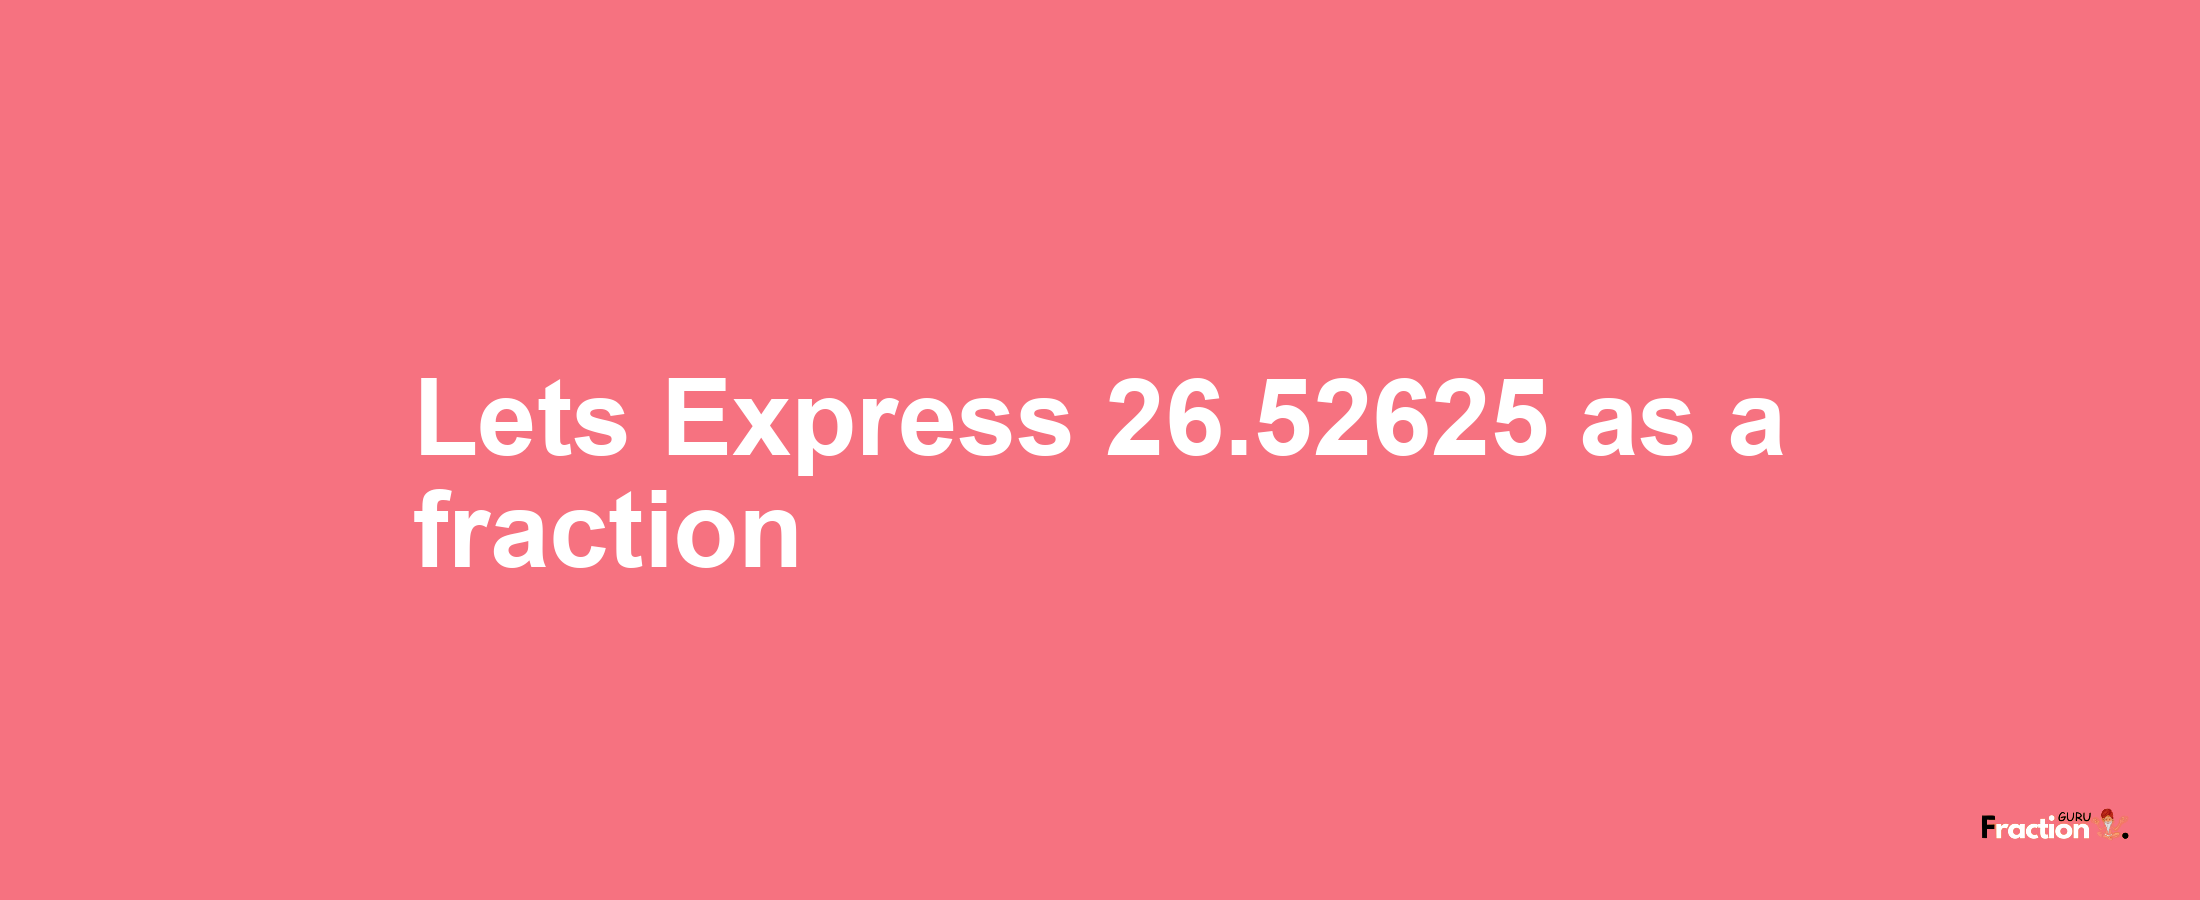 Lets Express 26.52625 as afraction